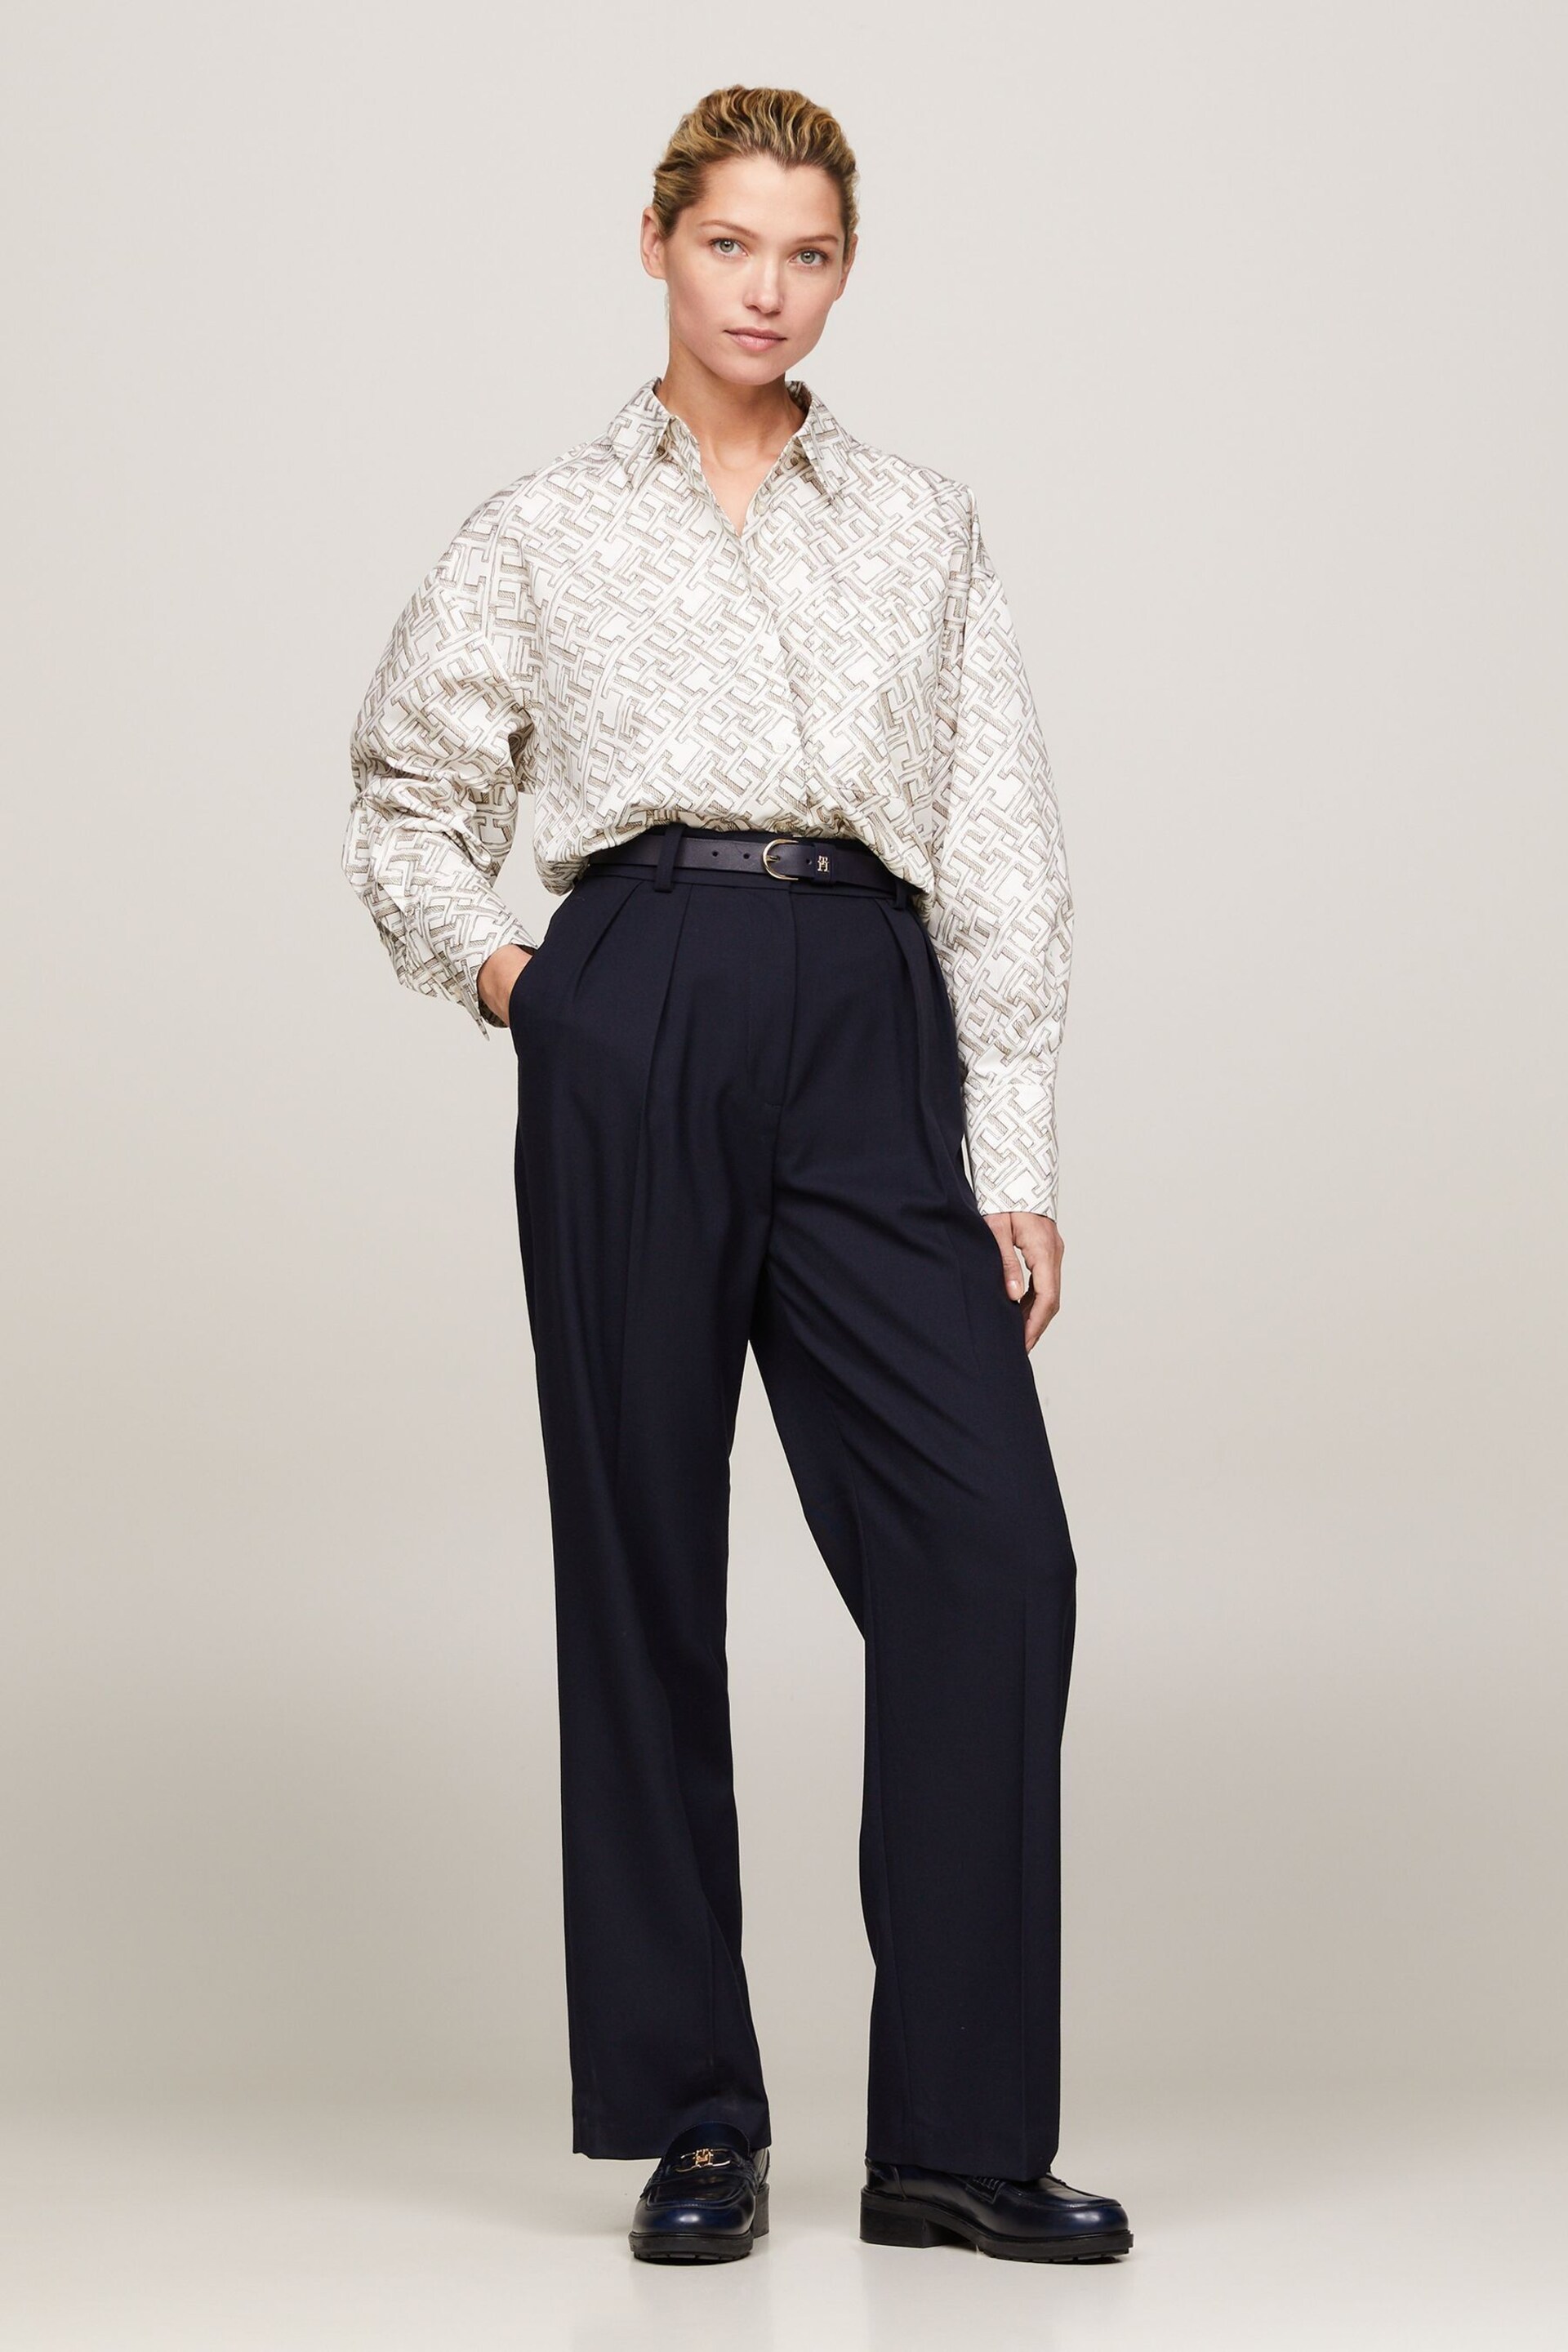 Tommy Hilfiger Relaxed Blue Straight Leg Trousers - Image 1 of 6